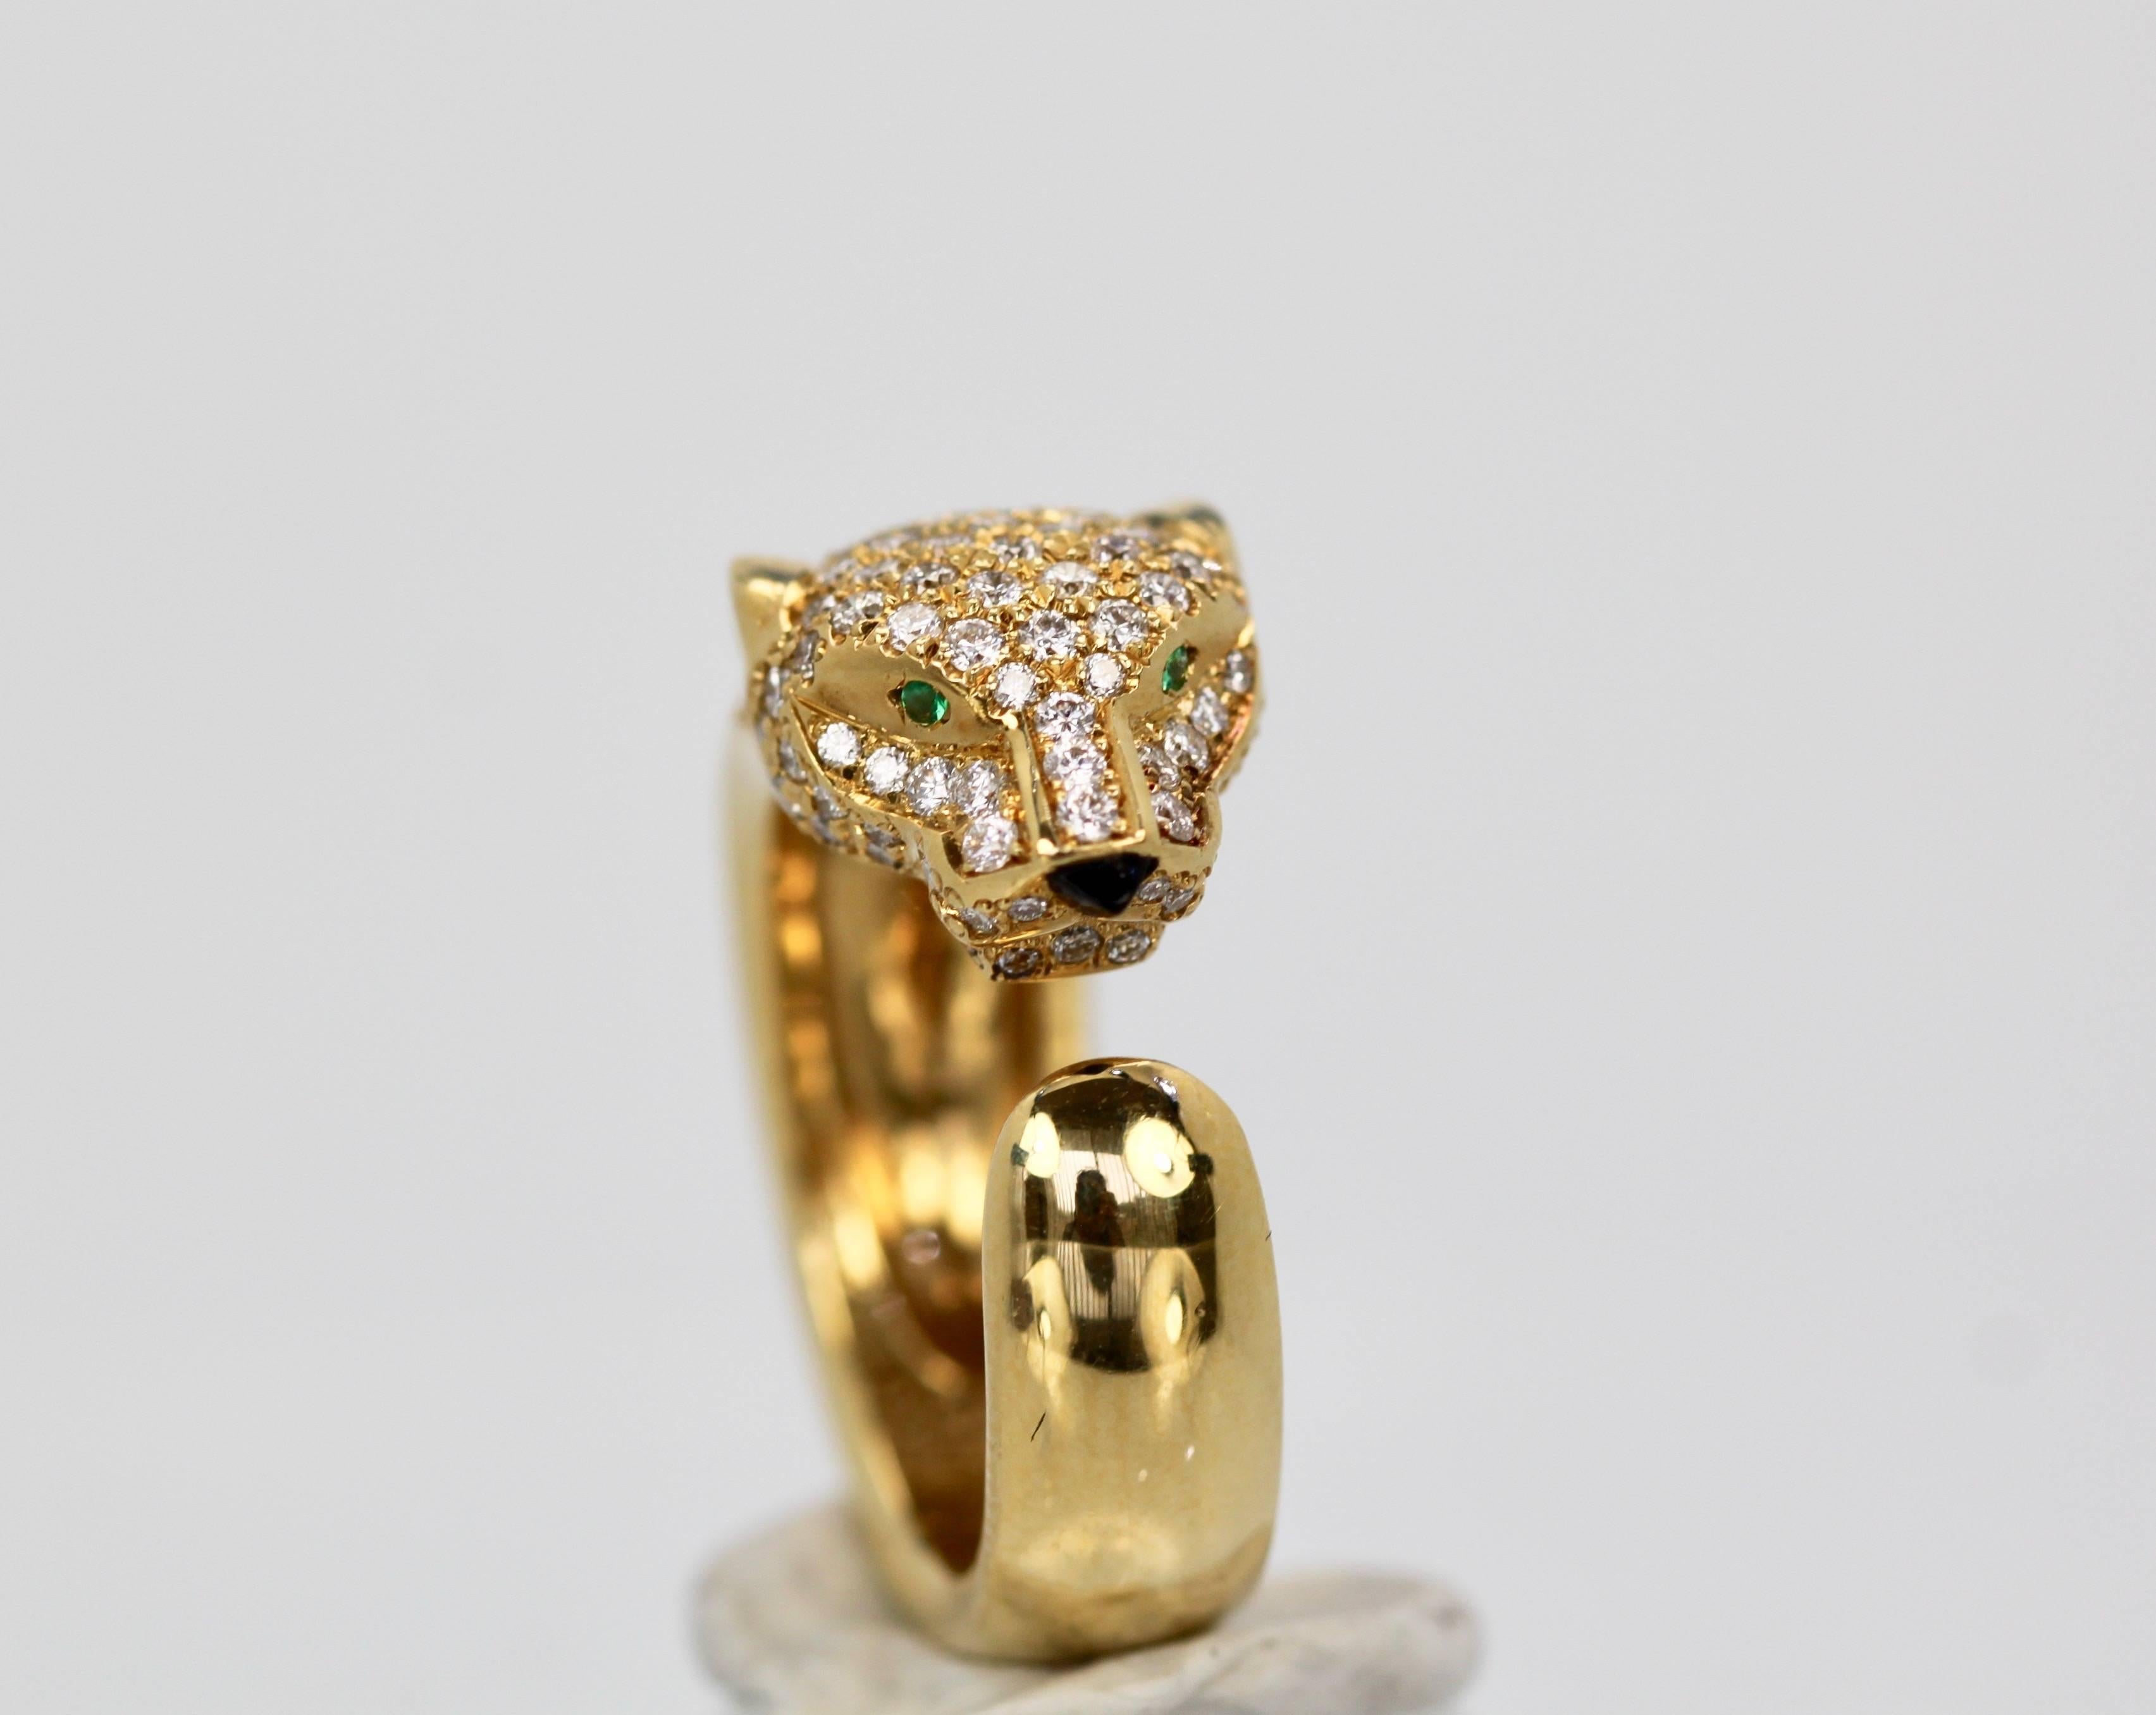 This gorgeous Cartier Panthere Ring is done in 18K Yellow Gold with a full Diamond Head. Emerald Eyes, Onyx Nose and 137 full cut Diamonds to total 1.15 Carats. Barely used and in excellent condition, this is a steal. 

Metal: 18K Yellow Gold